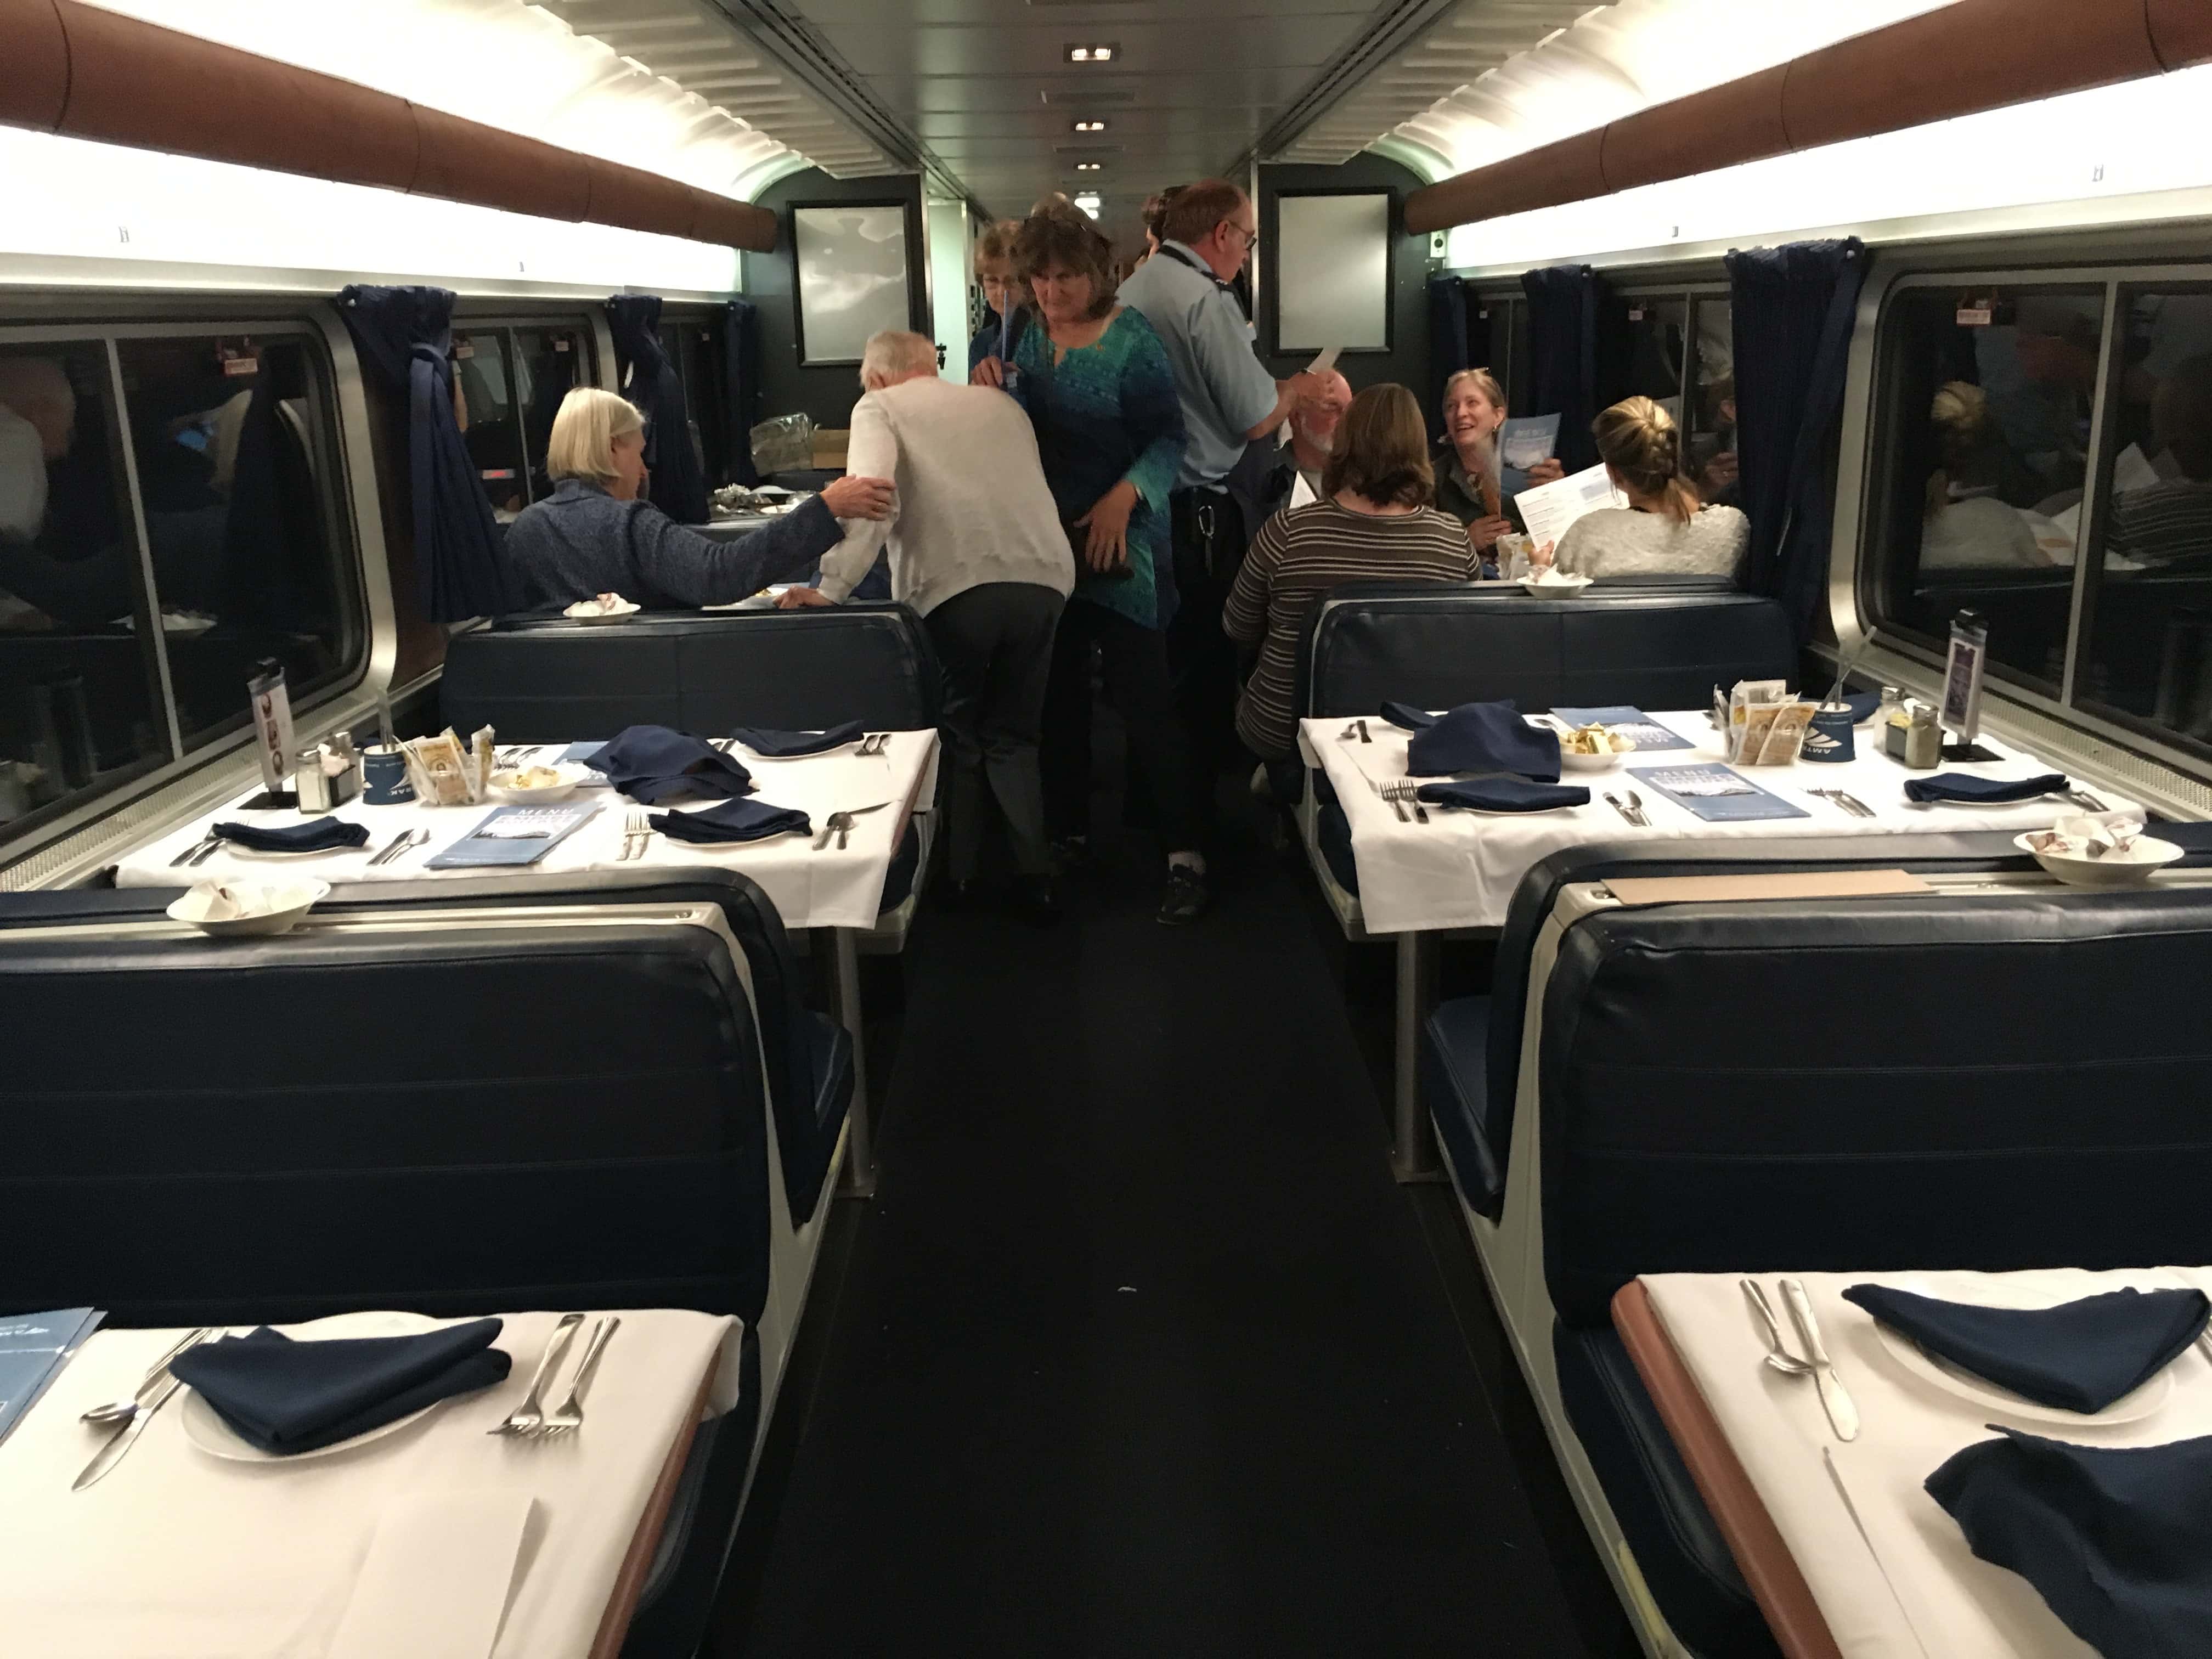 Dining car on the Amtrak Empire Builder from Seattle to Chicago